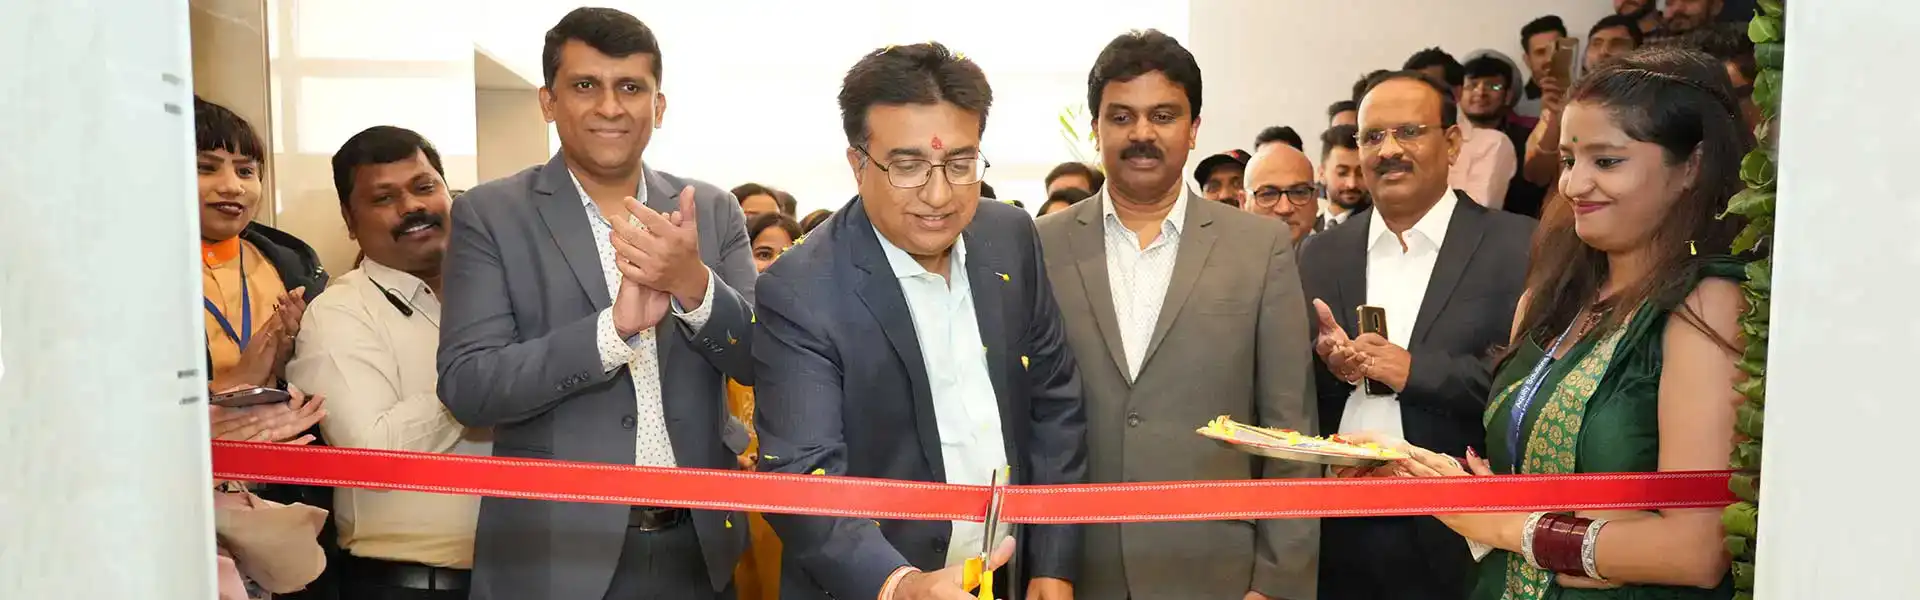 AQuity Solutions Opens Ninth Operations Center  in Mohali, India to Support Record Growth